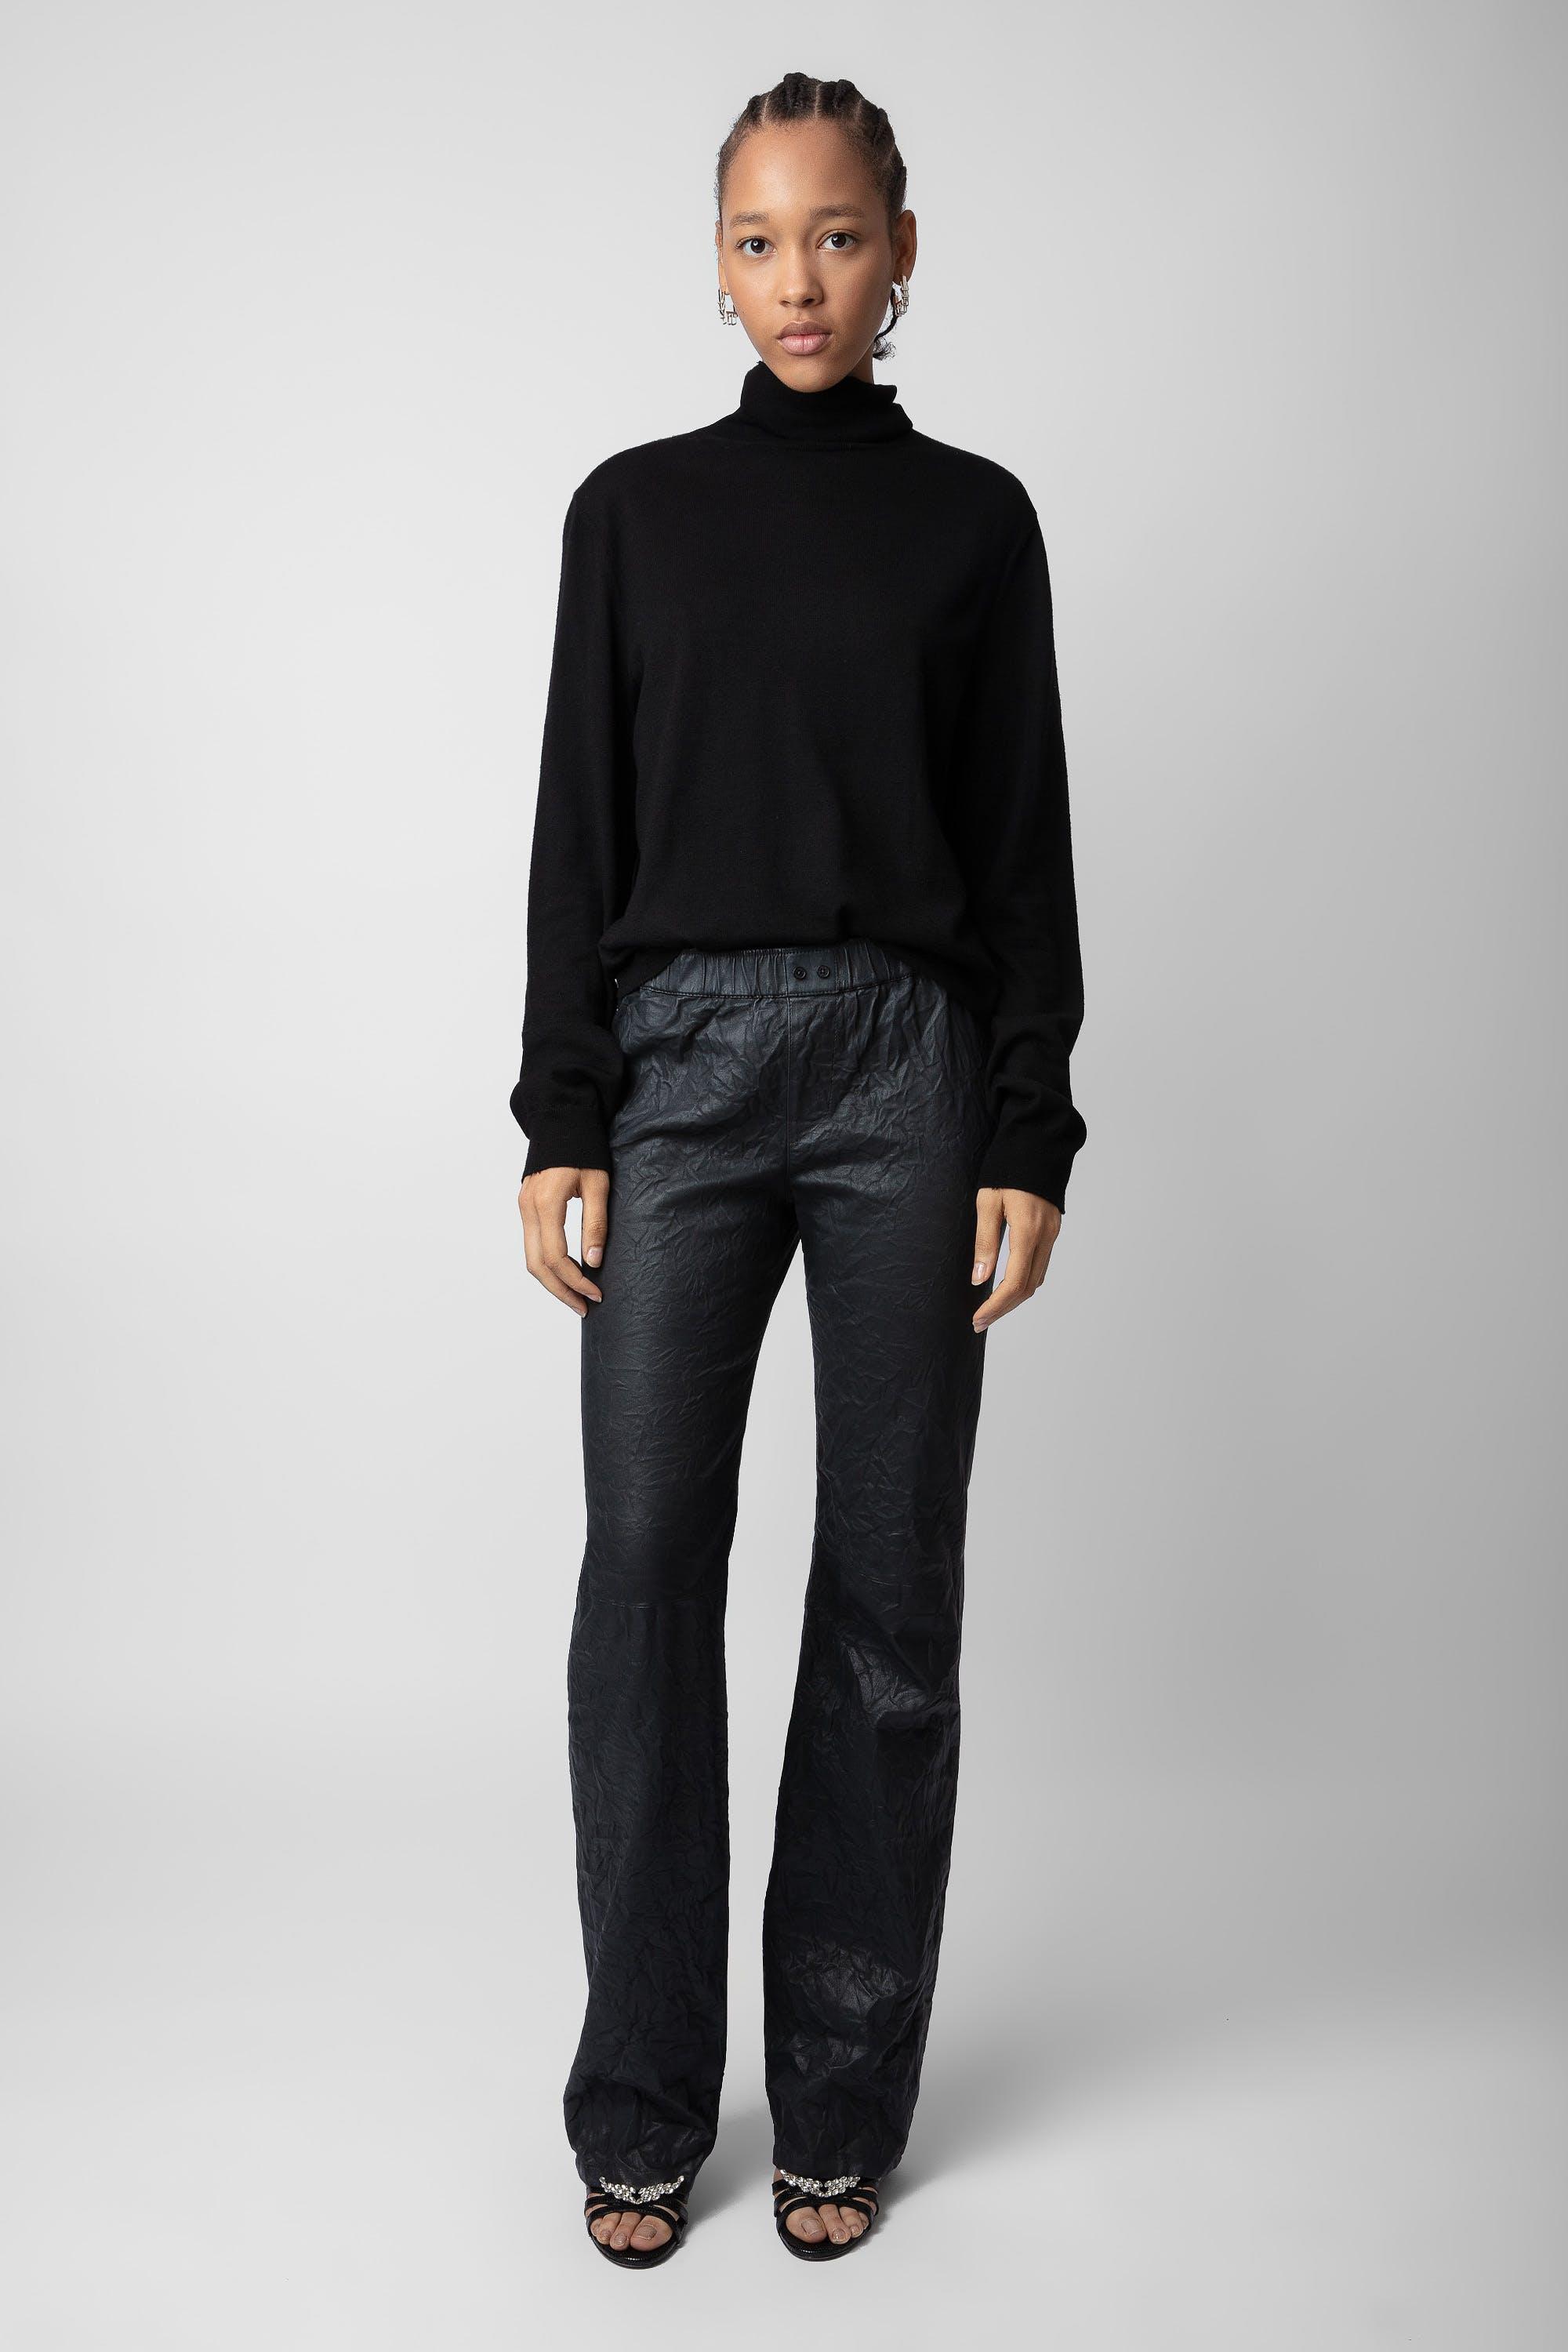 Zadig & Voltaire Pauline Crinkled Leather Pants in Black | Lyst